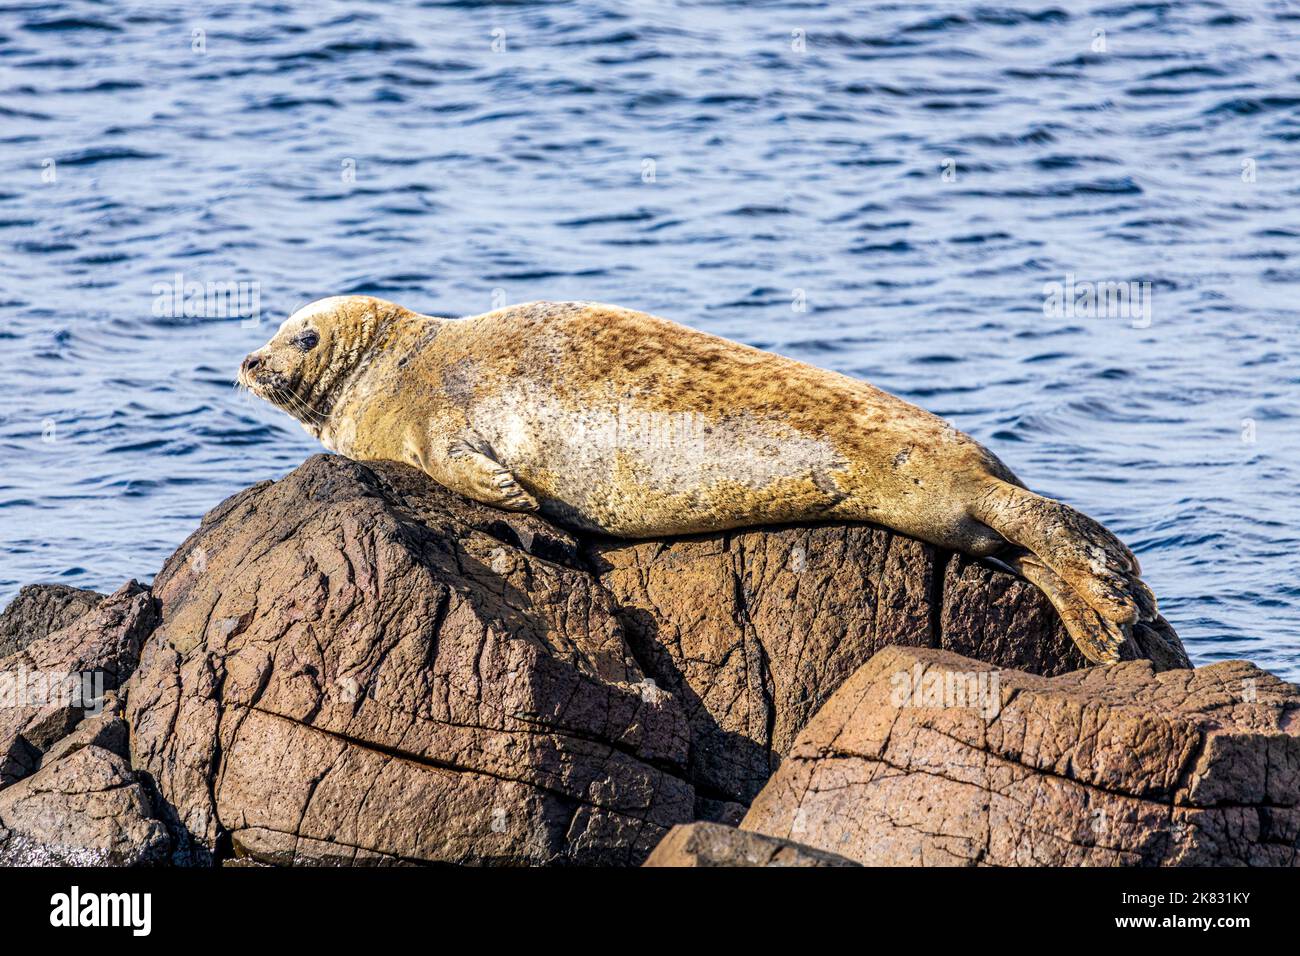 A seal hauled out on a rock at Machrihanish on the Kintyre Peninsula, Argyll & Bute, Scotland UK Stock Photo